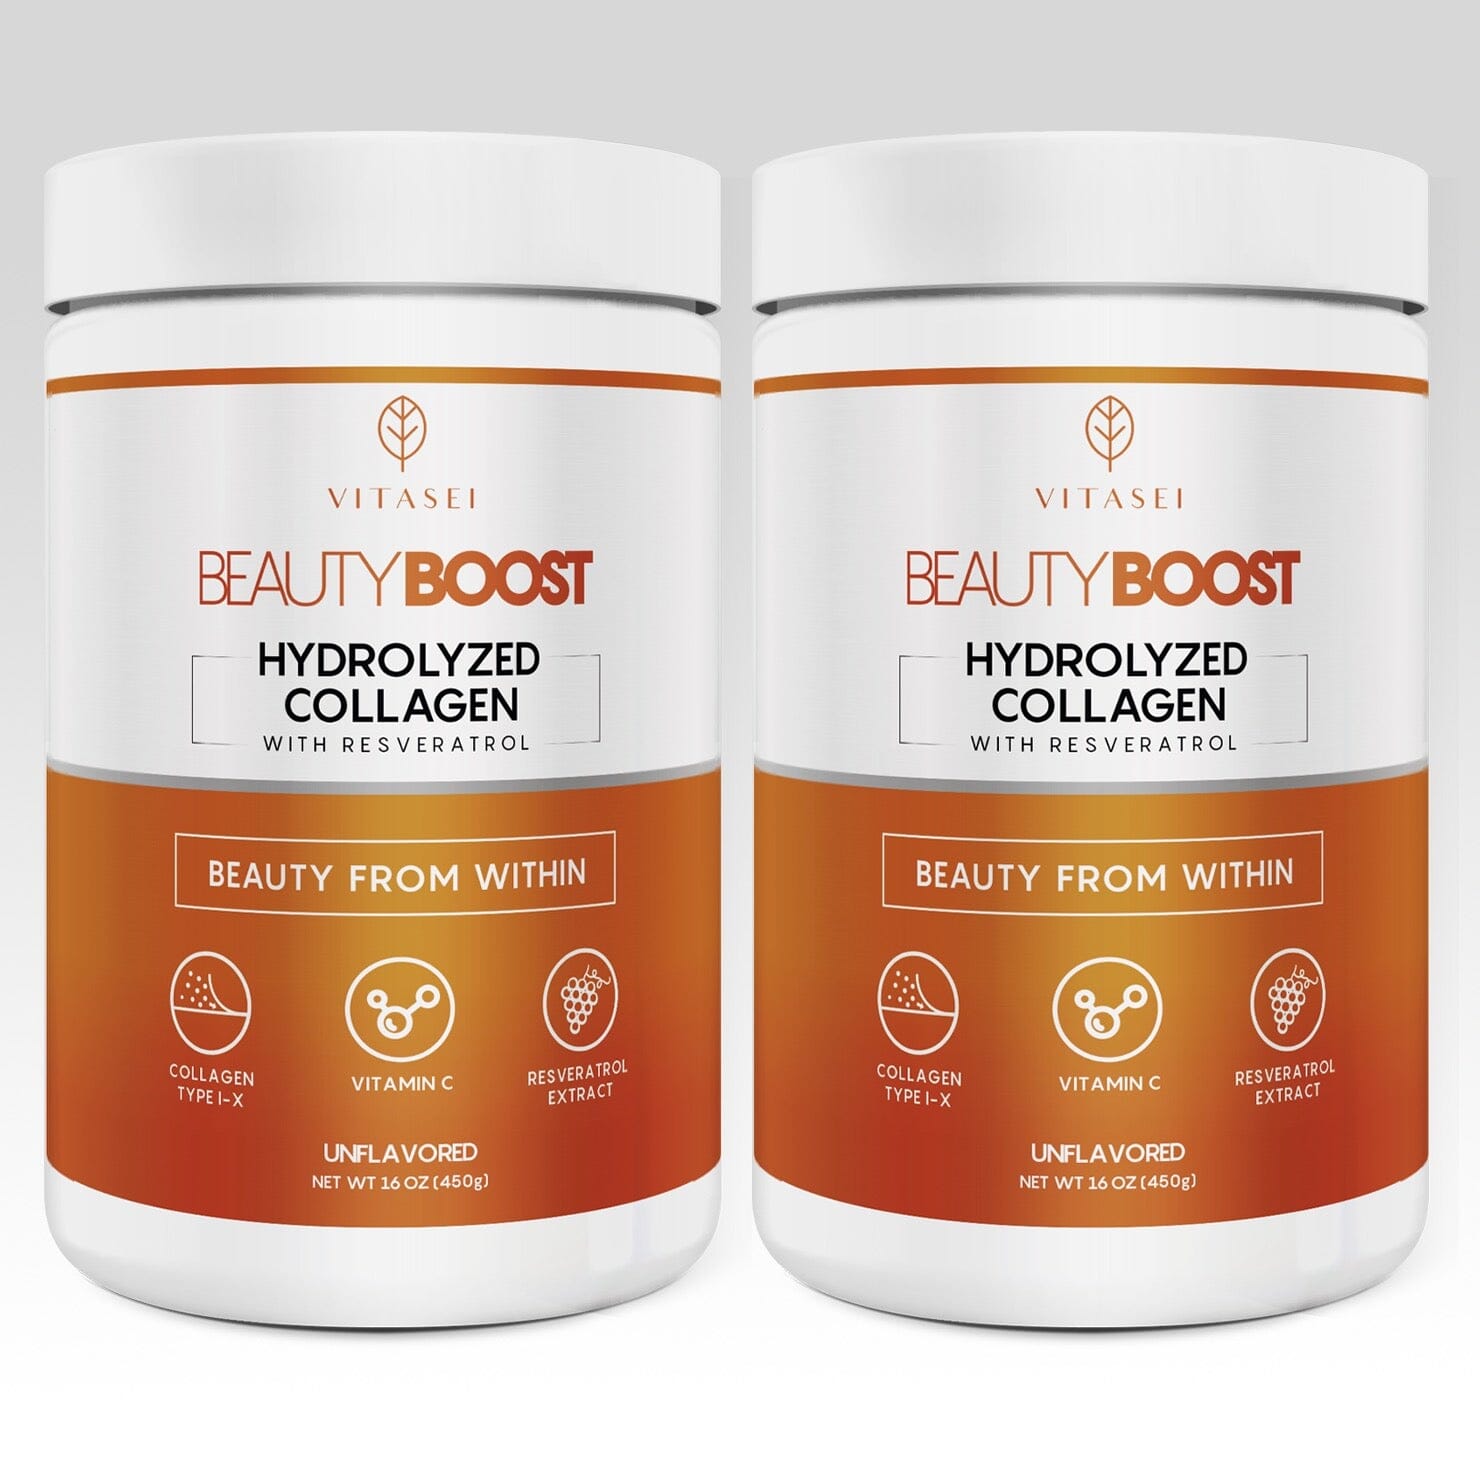 UNFLAVORED MAXIMUM ABSORPTION HYDROLYZED COLLAGEN